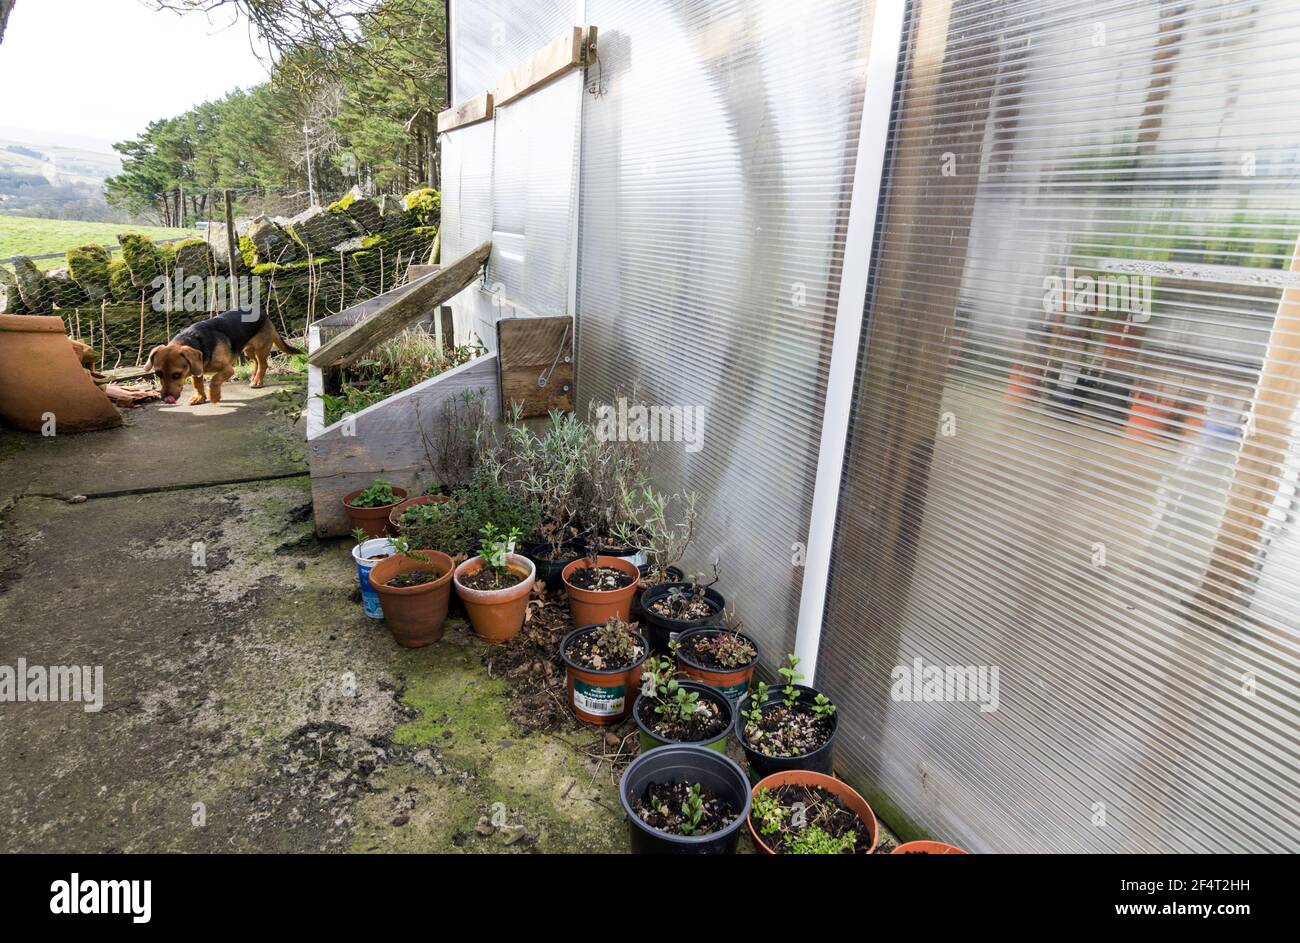 Greenhouse with a cold frame outside, and a number of potted plants. A small dog investigates. UK Stock Photo